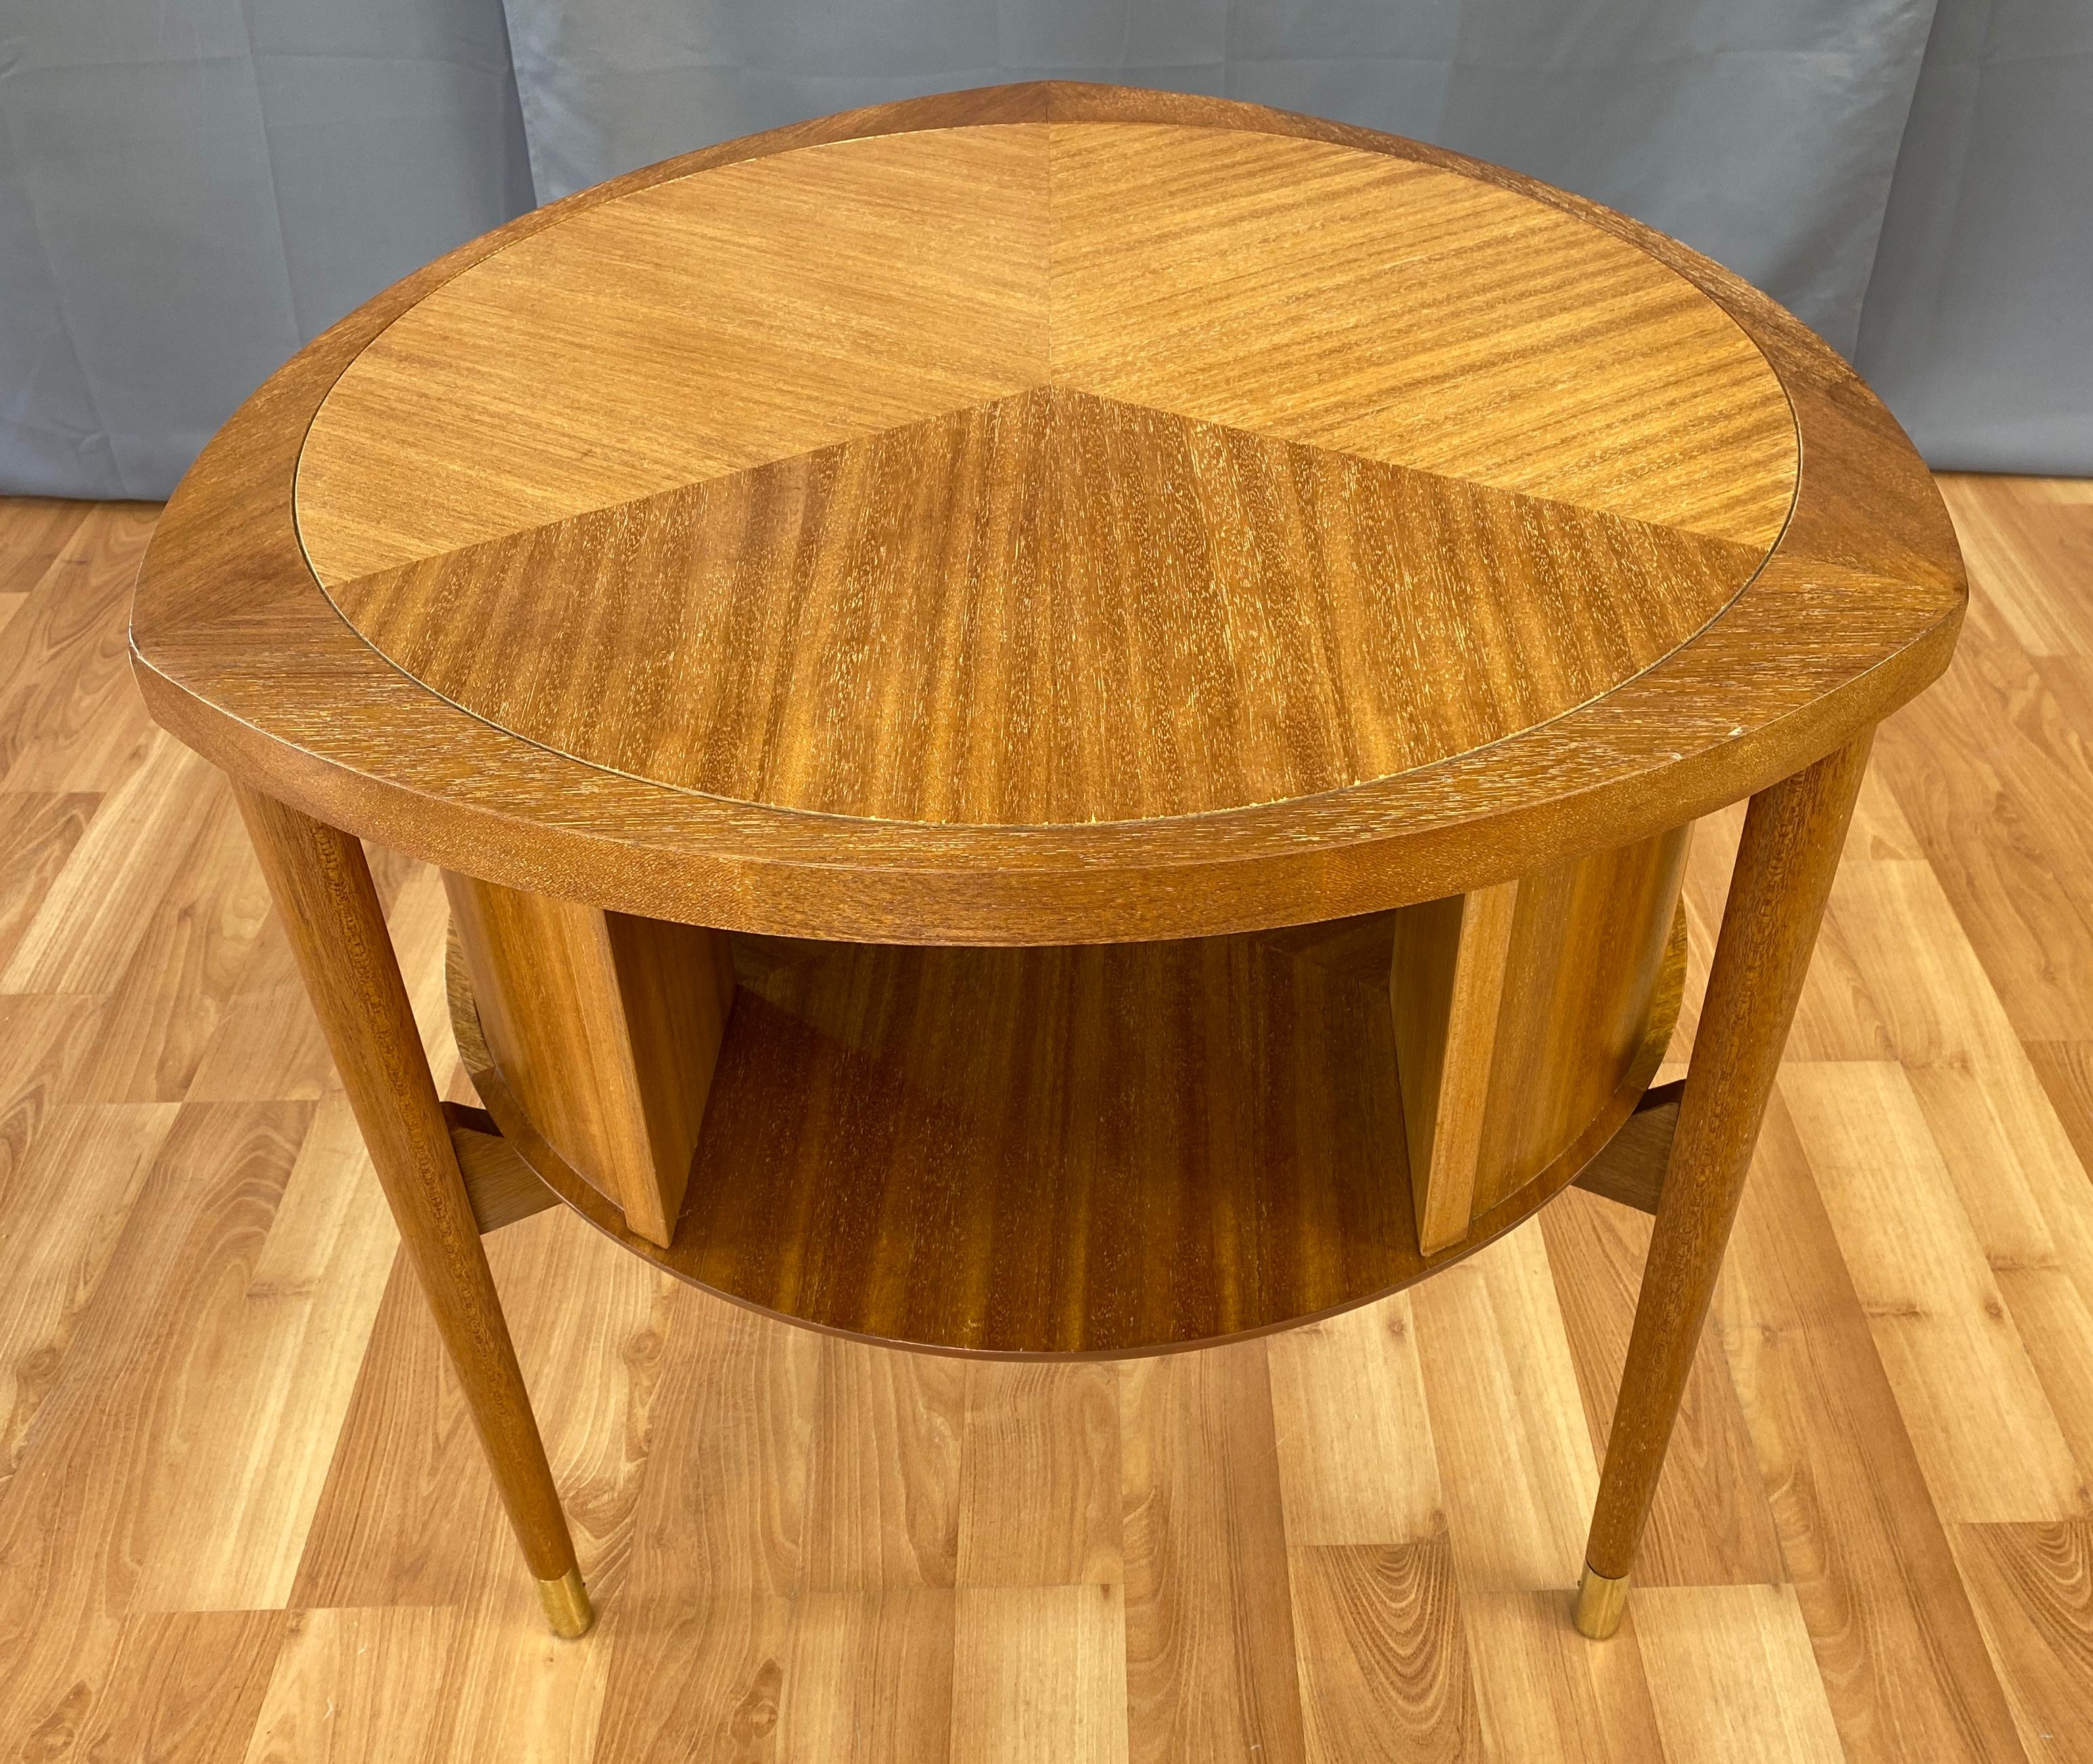 A Mahogany drum table designed by John Keal for Brown-Saltman which was based in Los Angeles, California.
Stamp on it's underside 